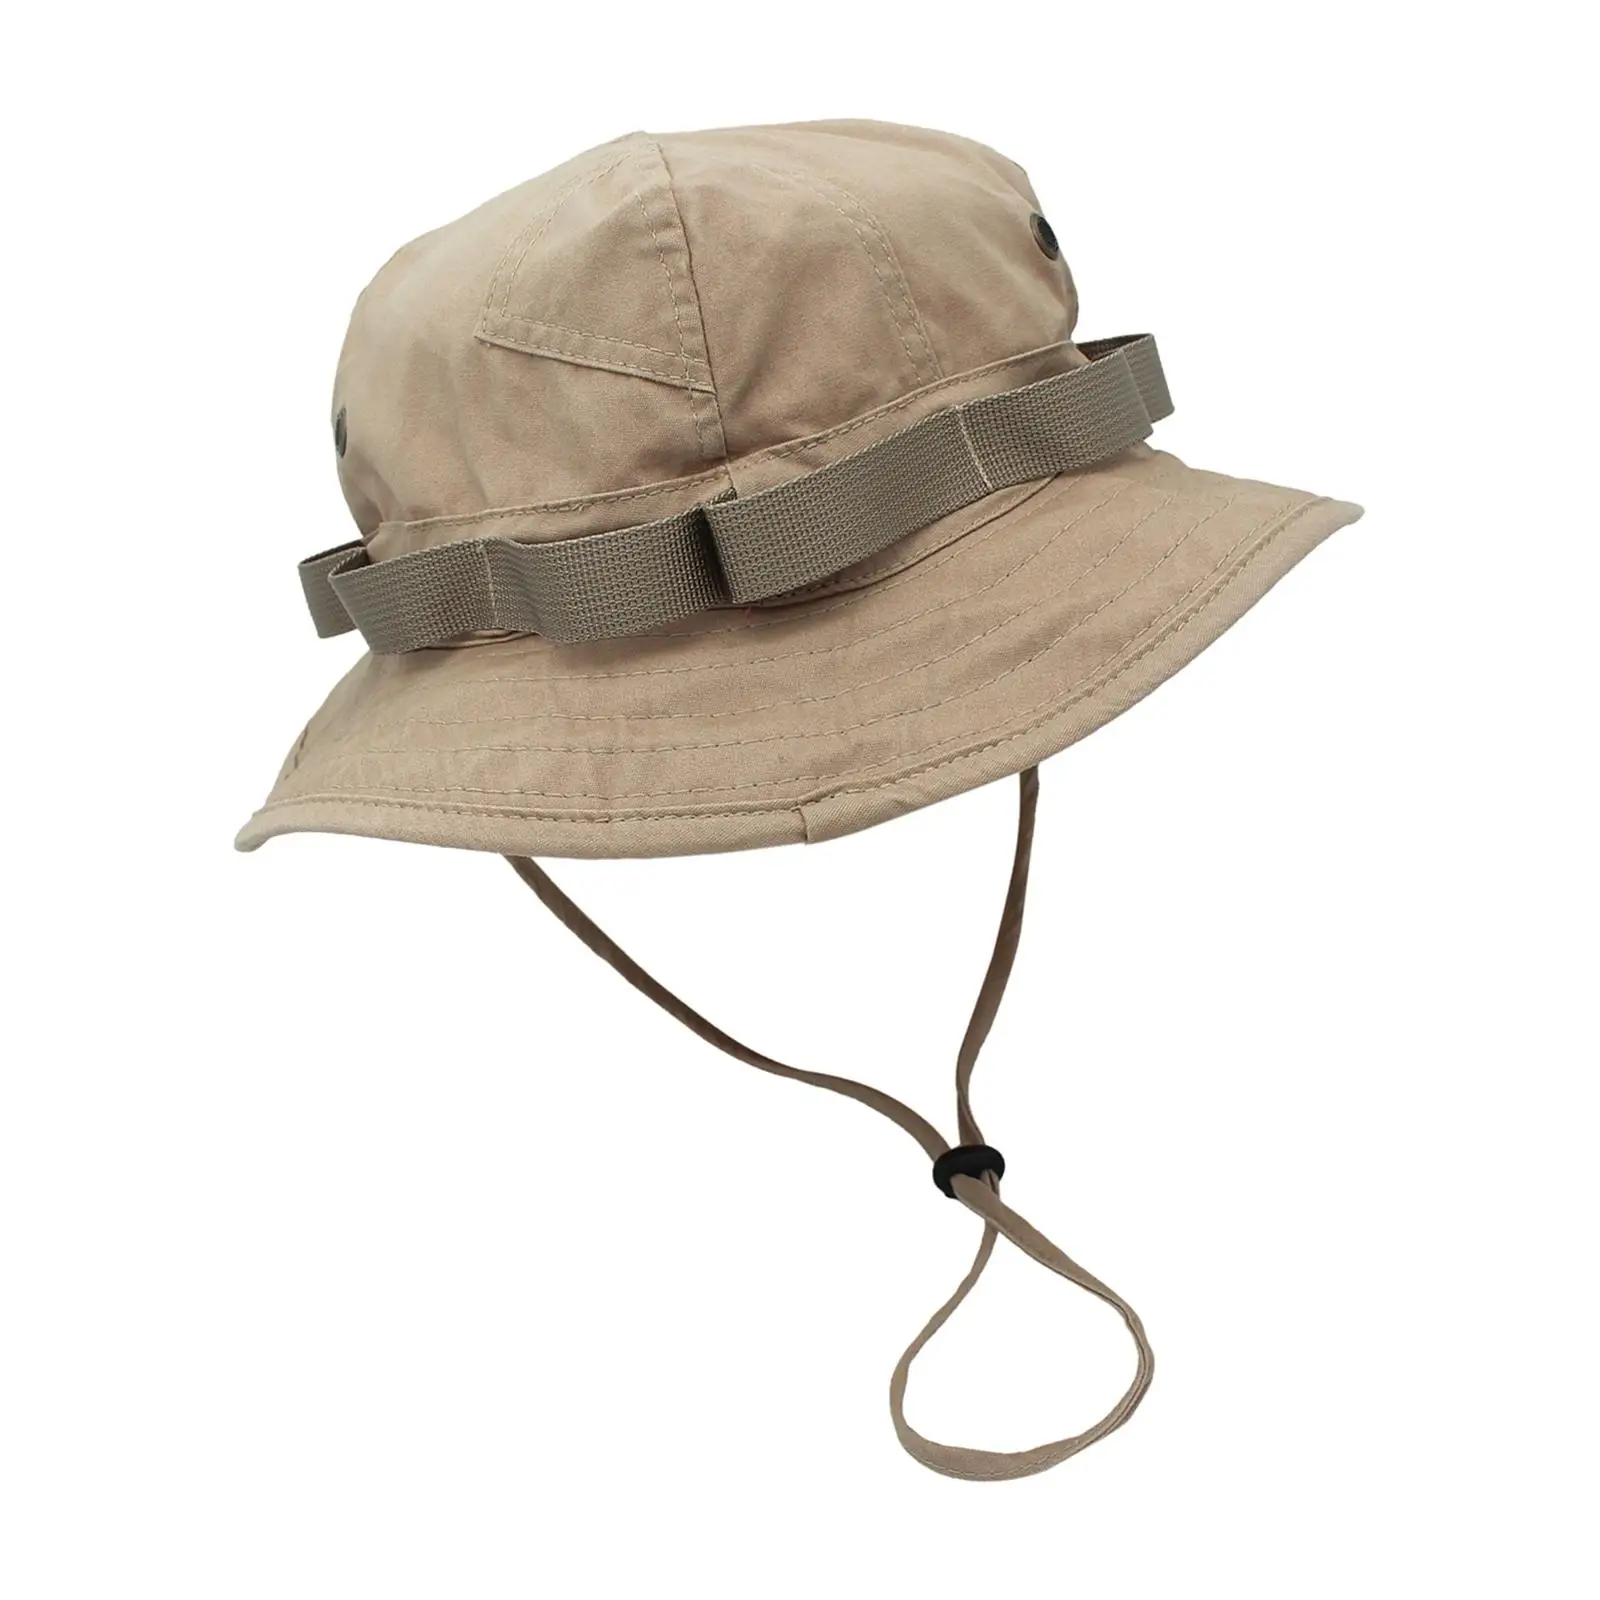 Bucket Hat, Breathable with Strings Durable Dechable Protective Fishing Hat for Camping